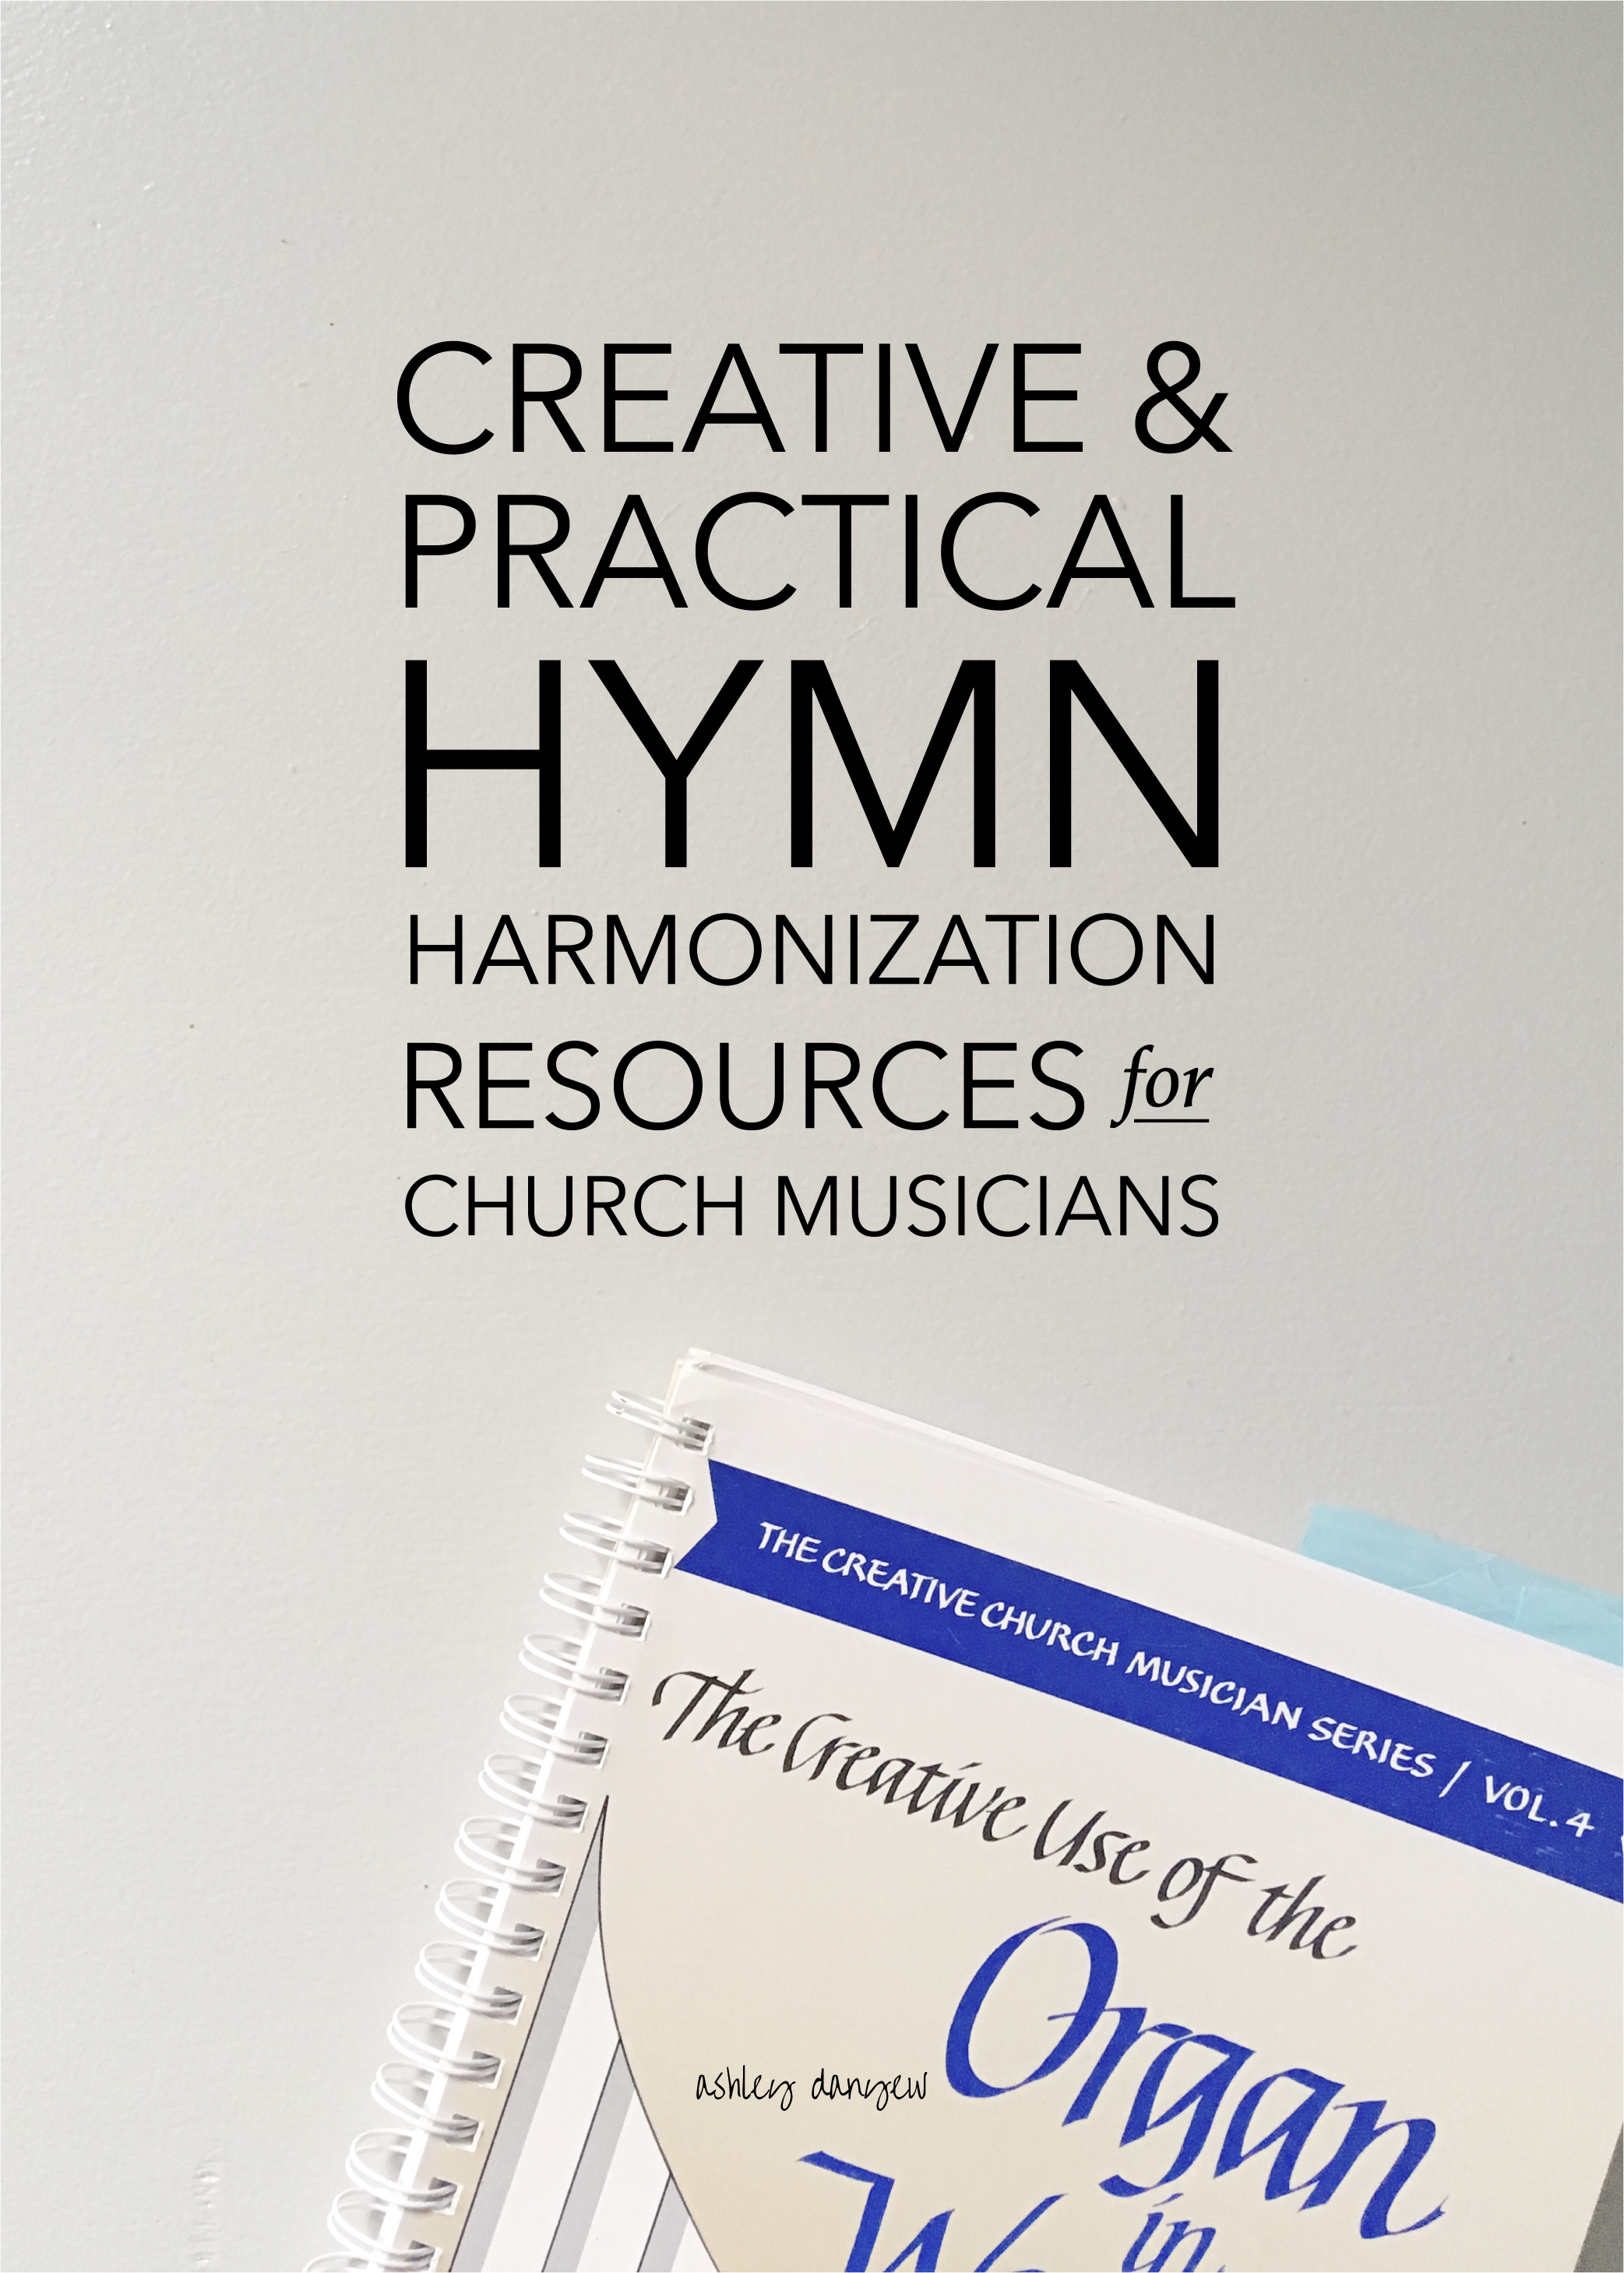 Creative and Practical Hymn Harmonization Resources for Church Musicians